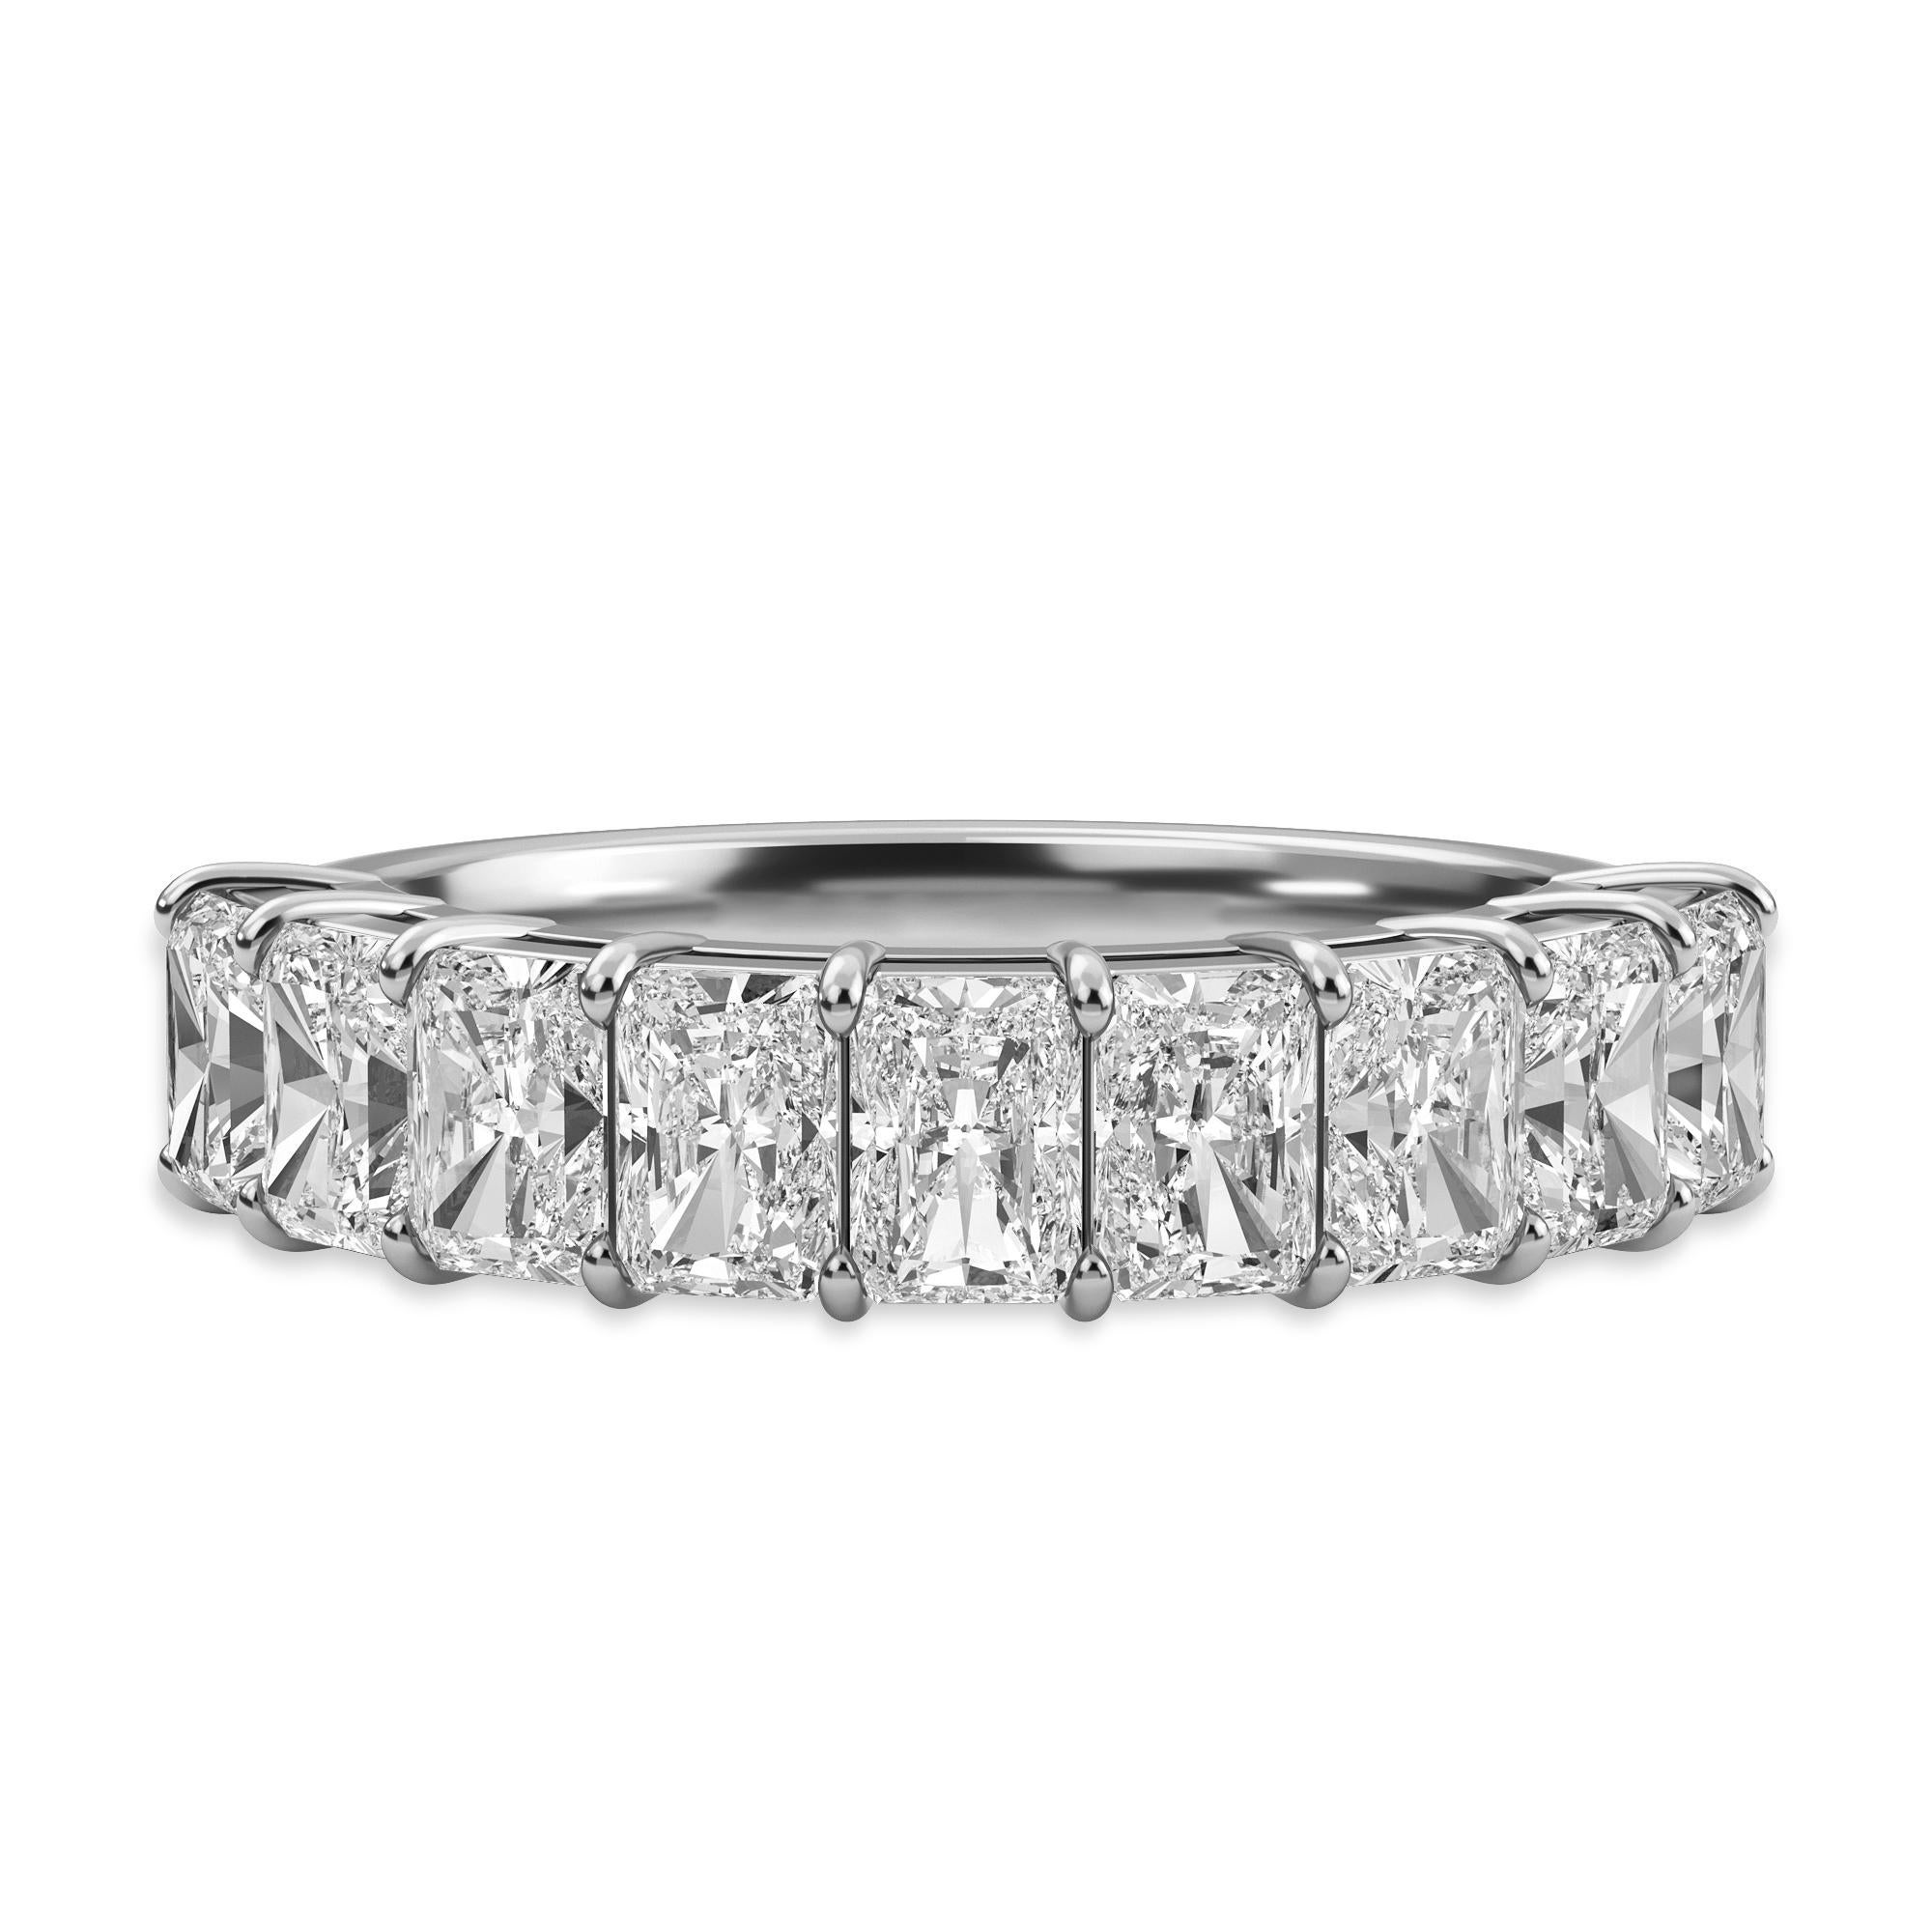 This Radiant Diamond Anniversary Band features 9 Radiant Diamonds, weighing 1.48 Total Carat Weight. 
The stones are G Color, and VS Clarity. This ring is set in Platinum, in a shared prong setting. 